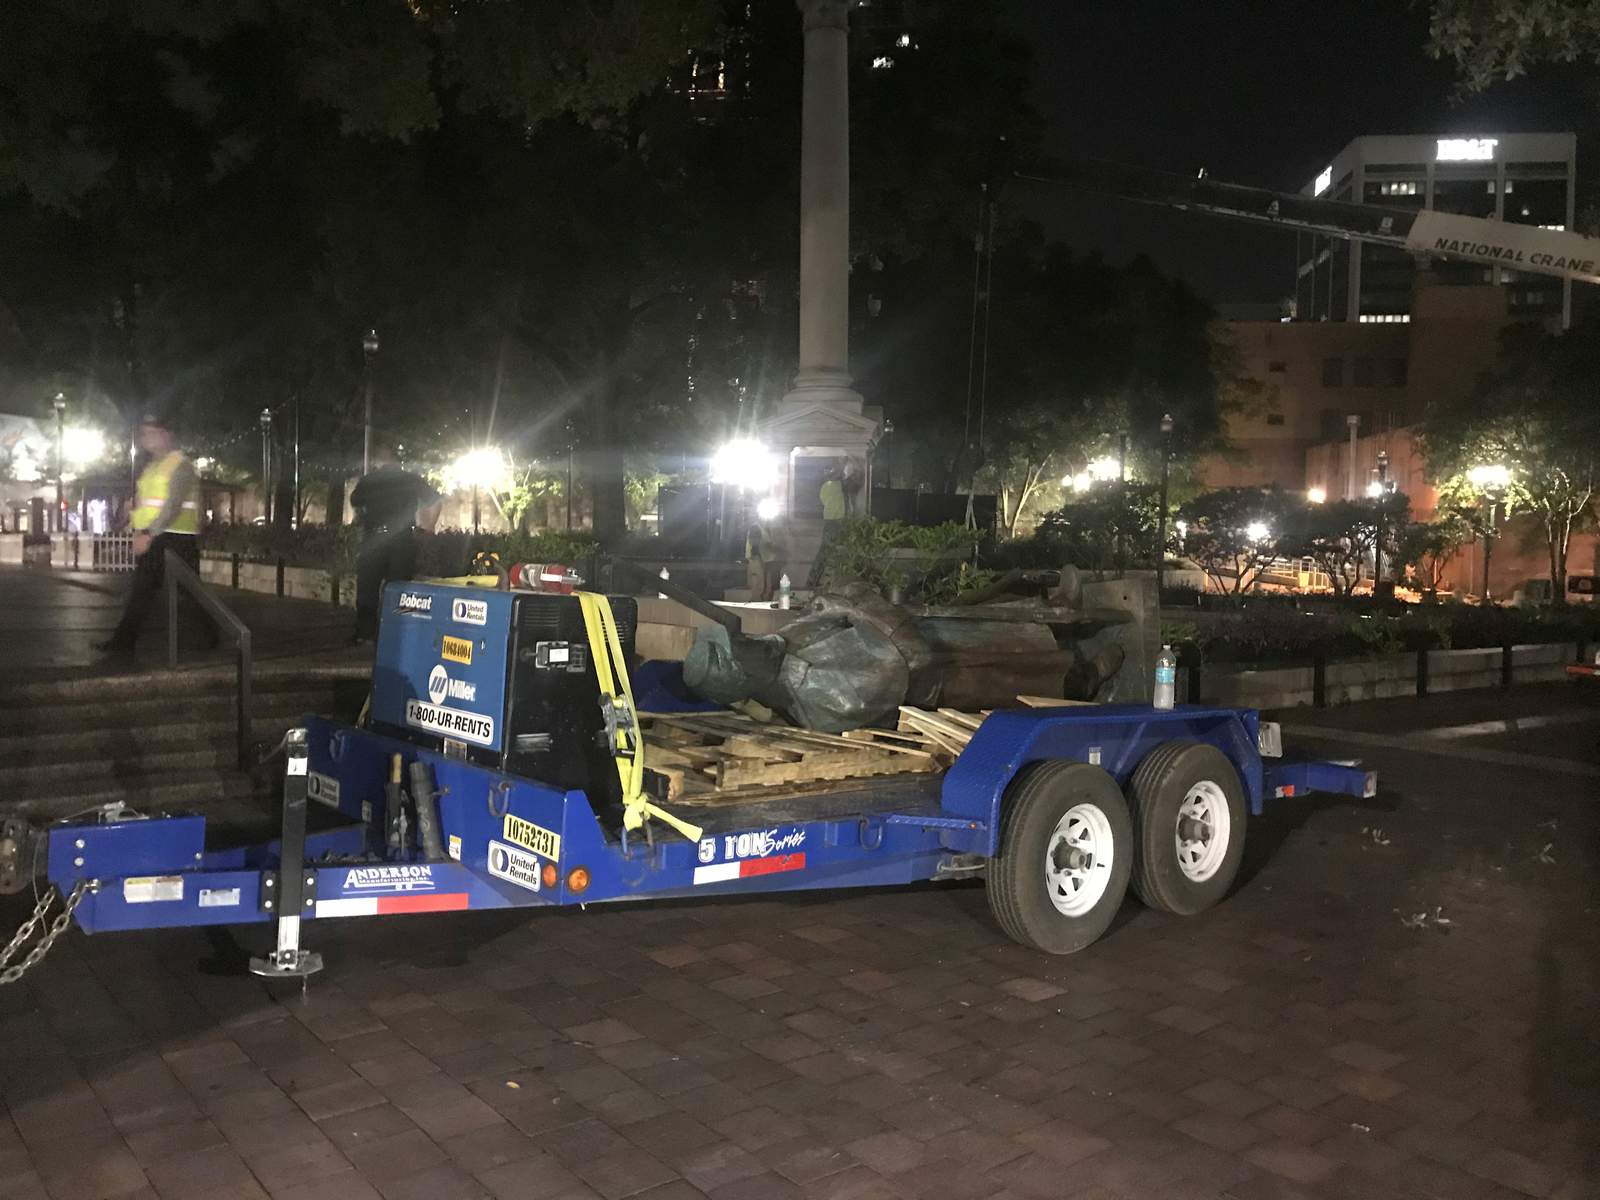 Confederate statue removed from Jacksonville Park by city crews overnight